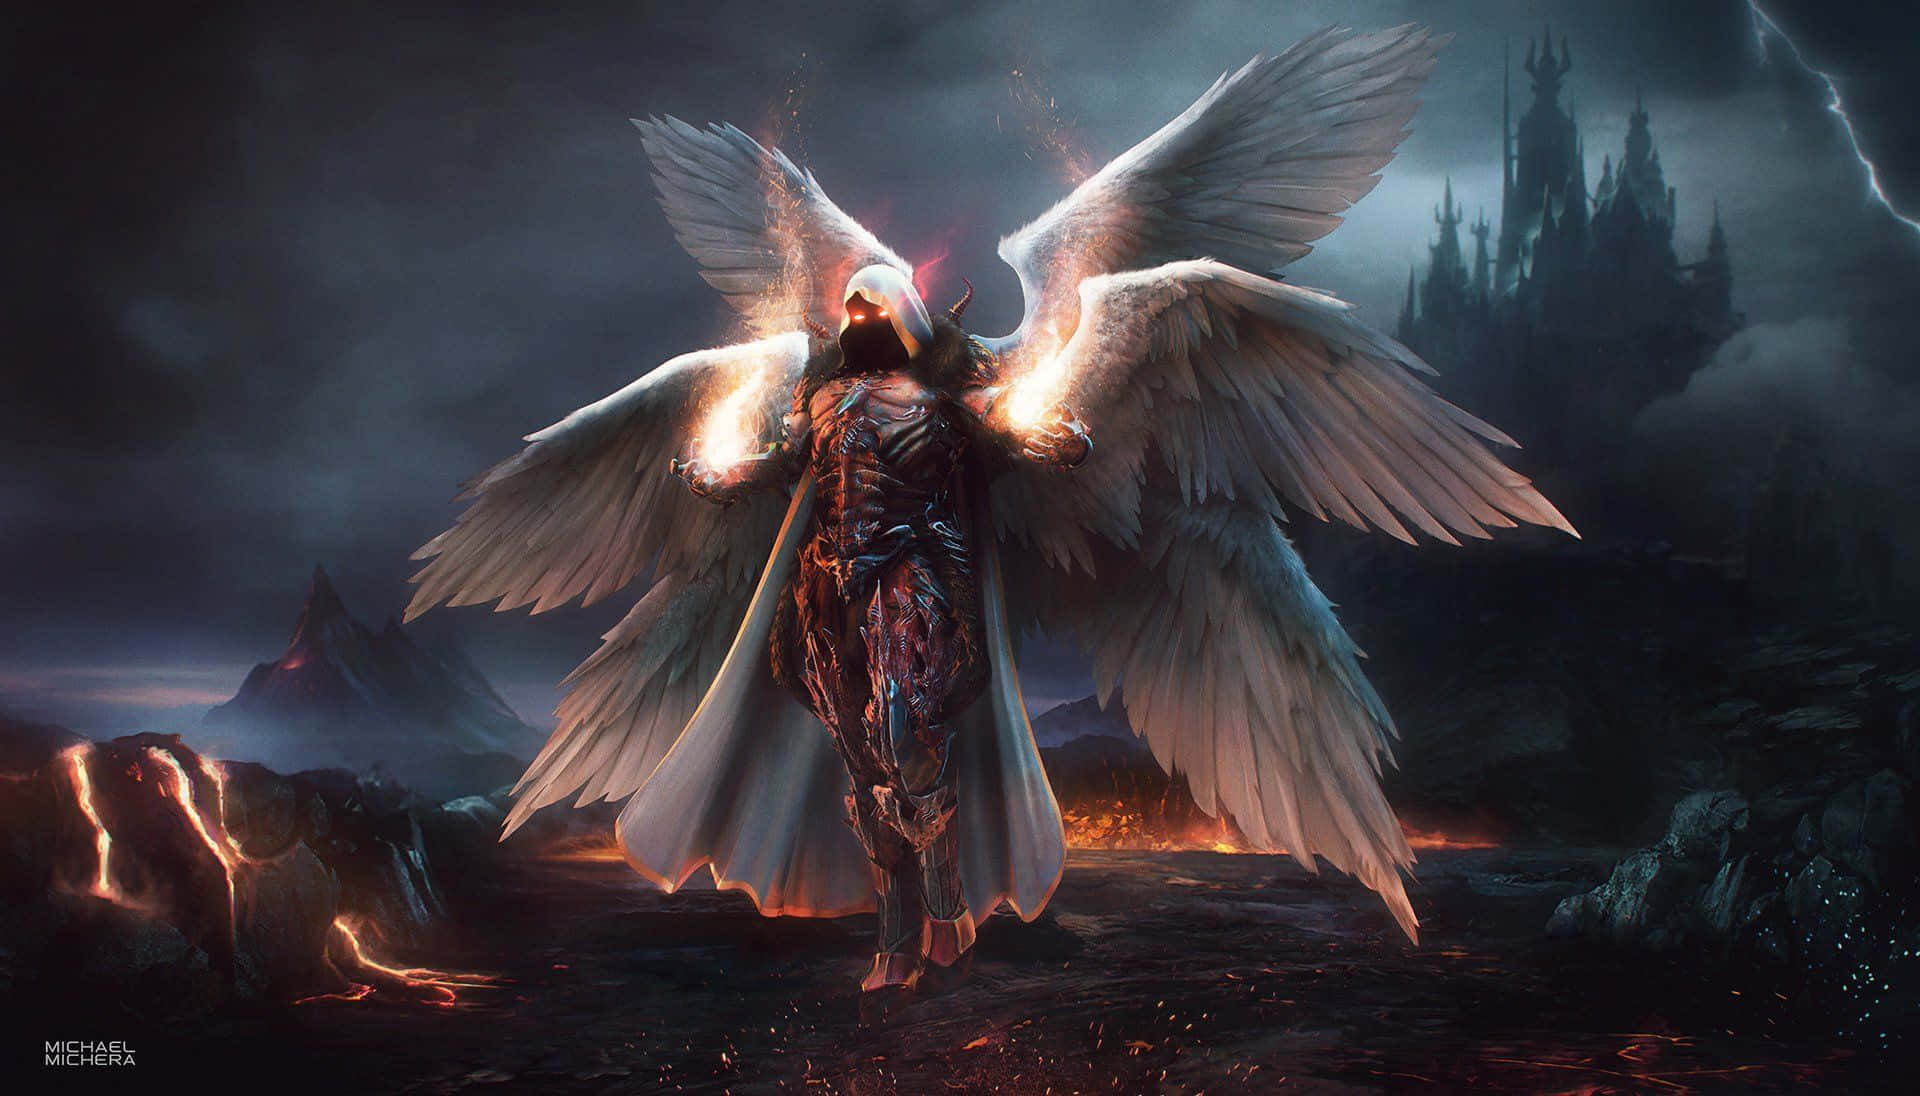 A White Angel With Wings Standing In The Middle Of A Dark Scene